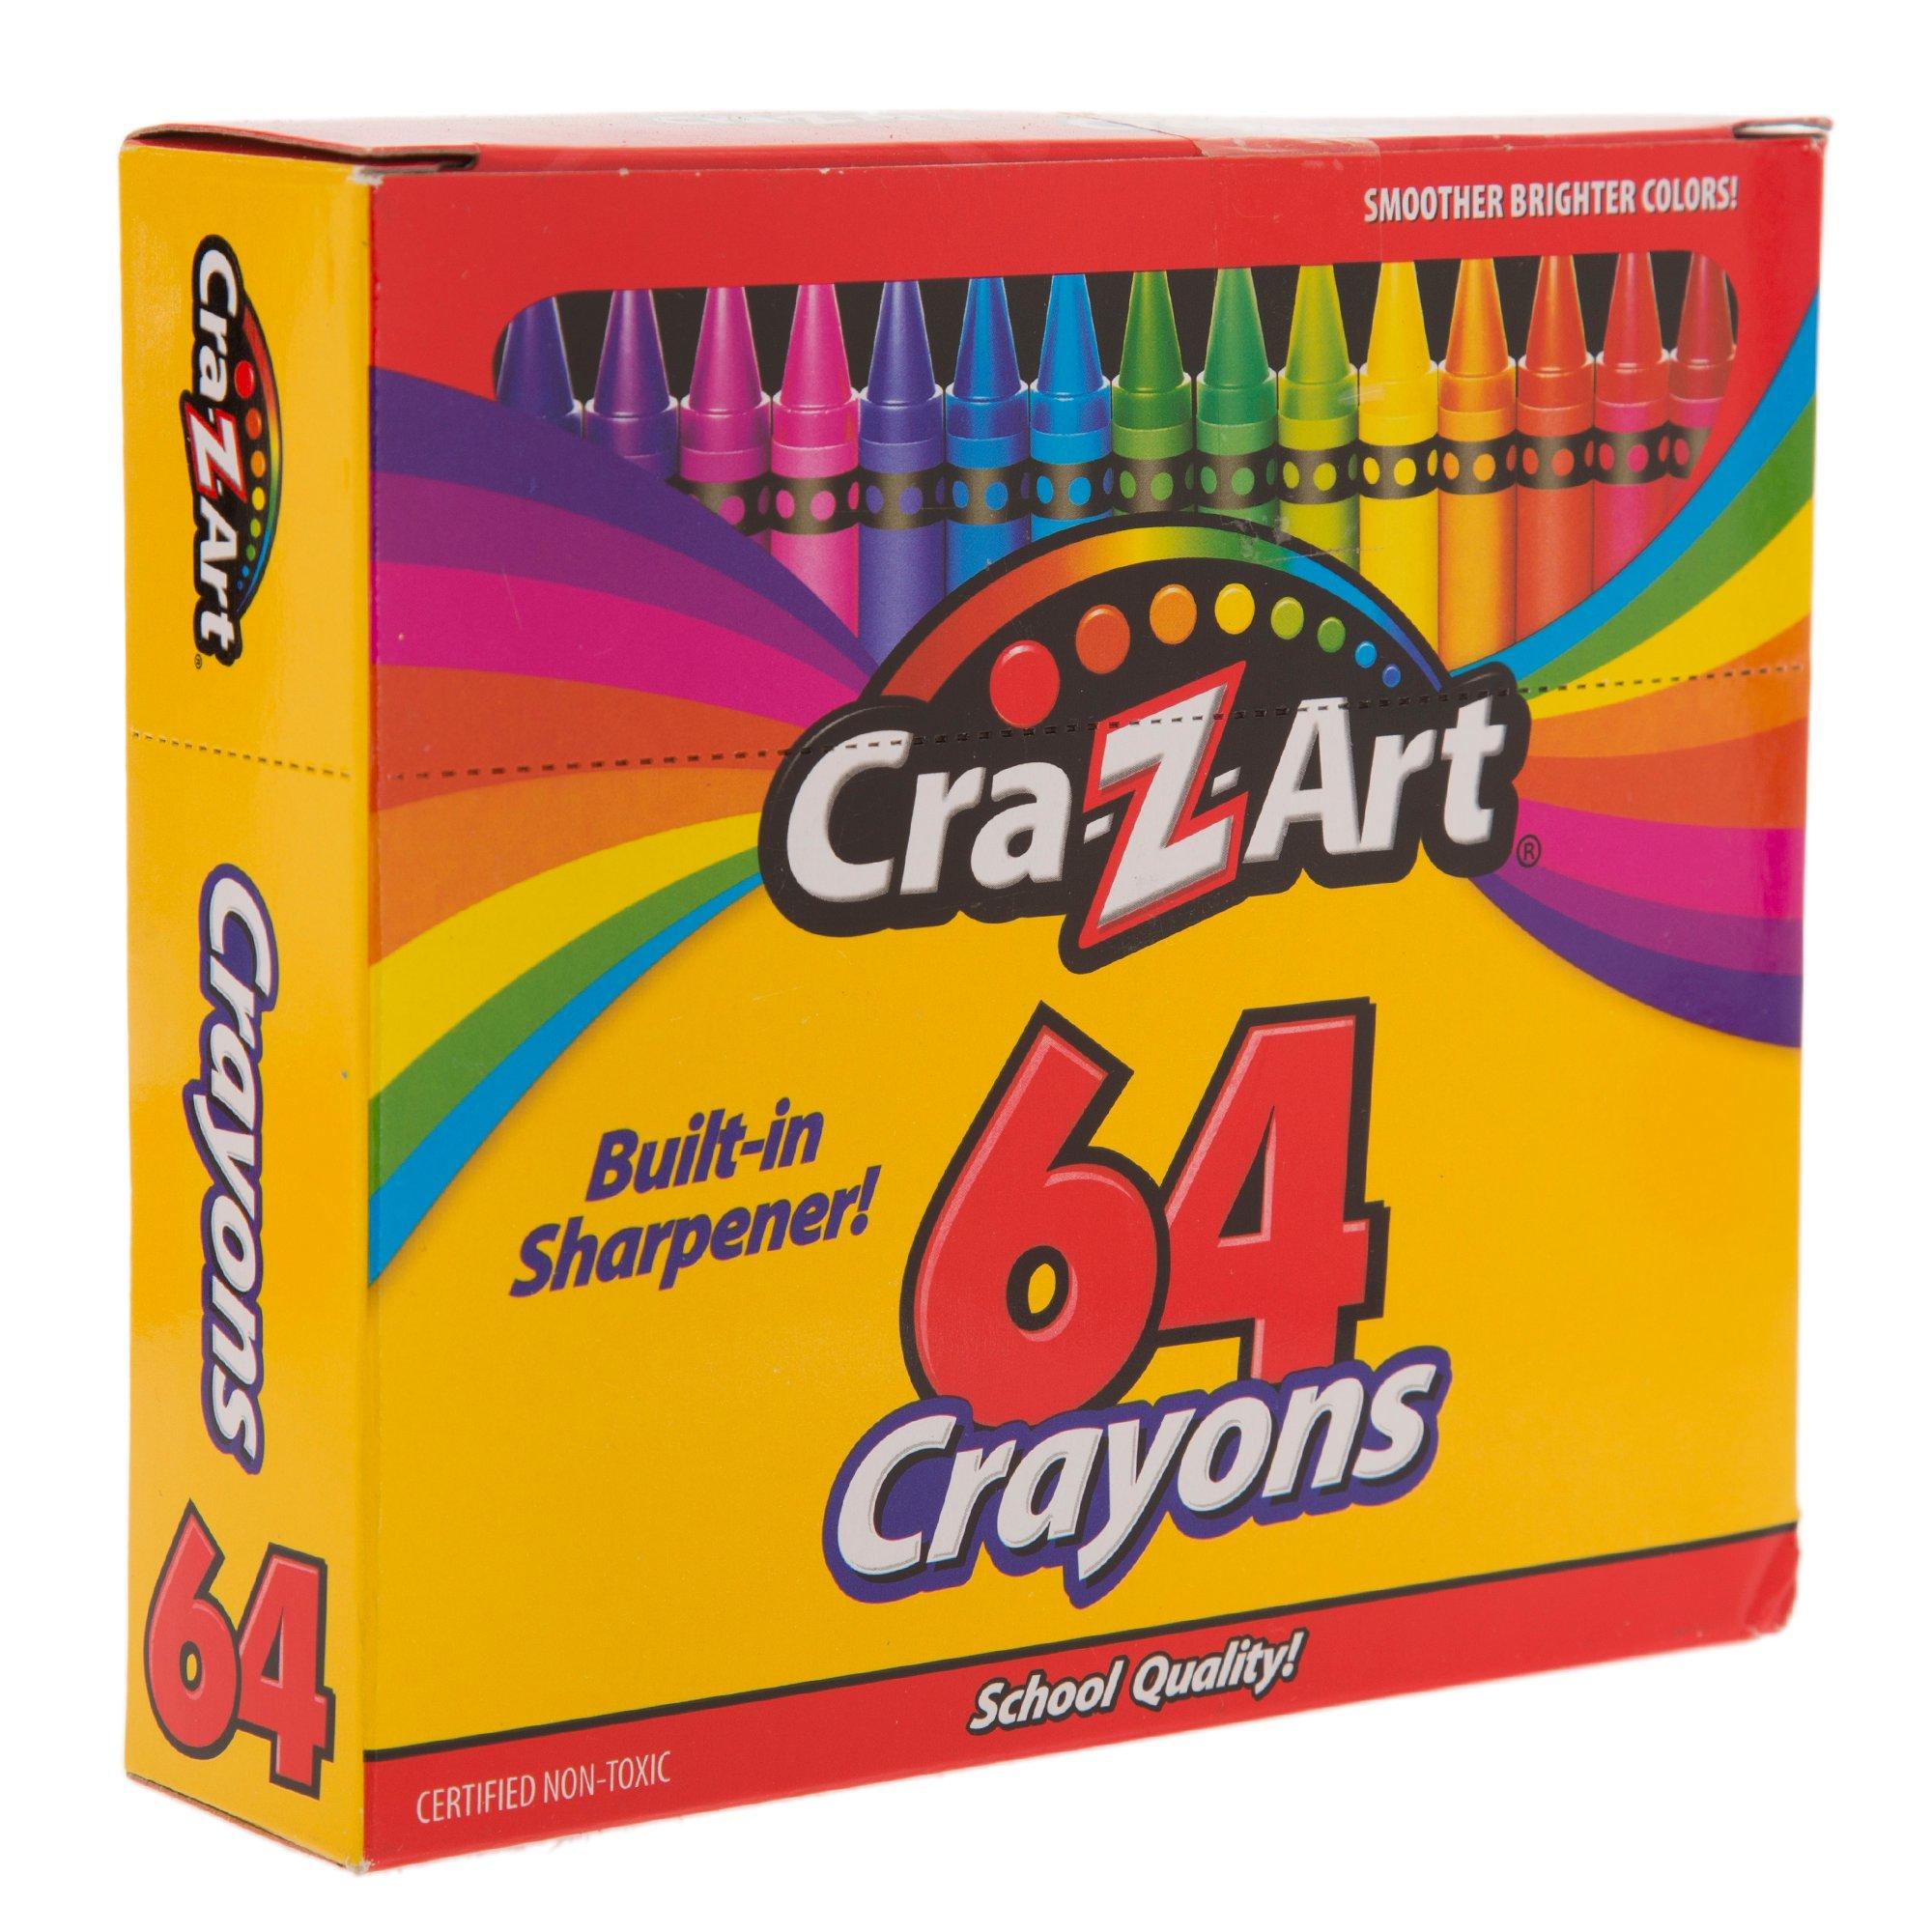 Crayola Ultra-Clean Washable Large Crayons - 16 Piece Set